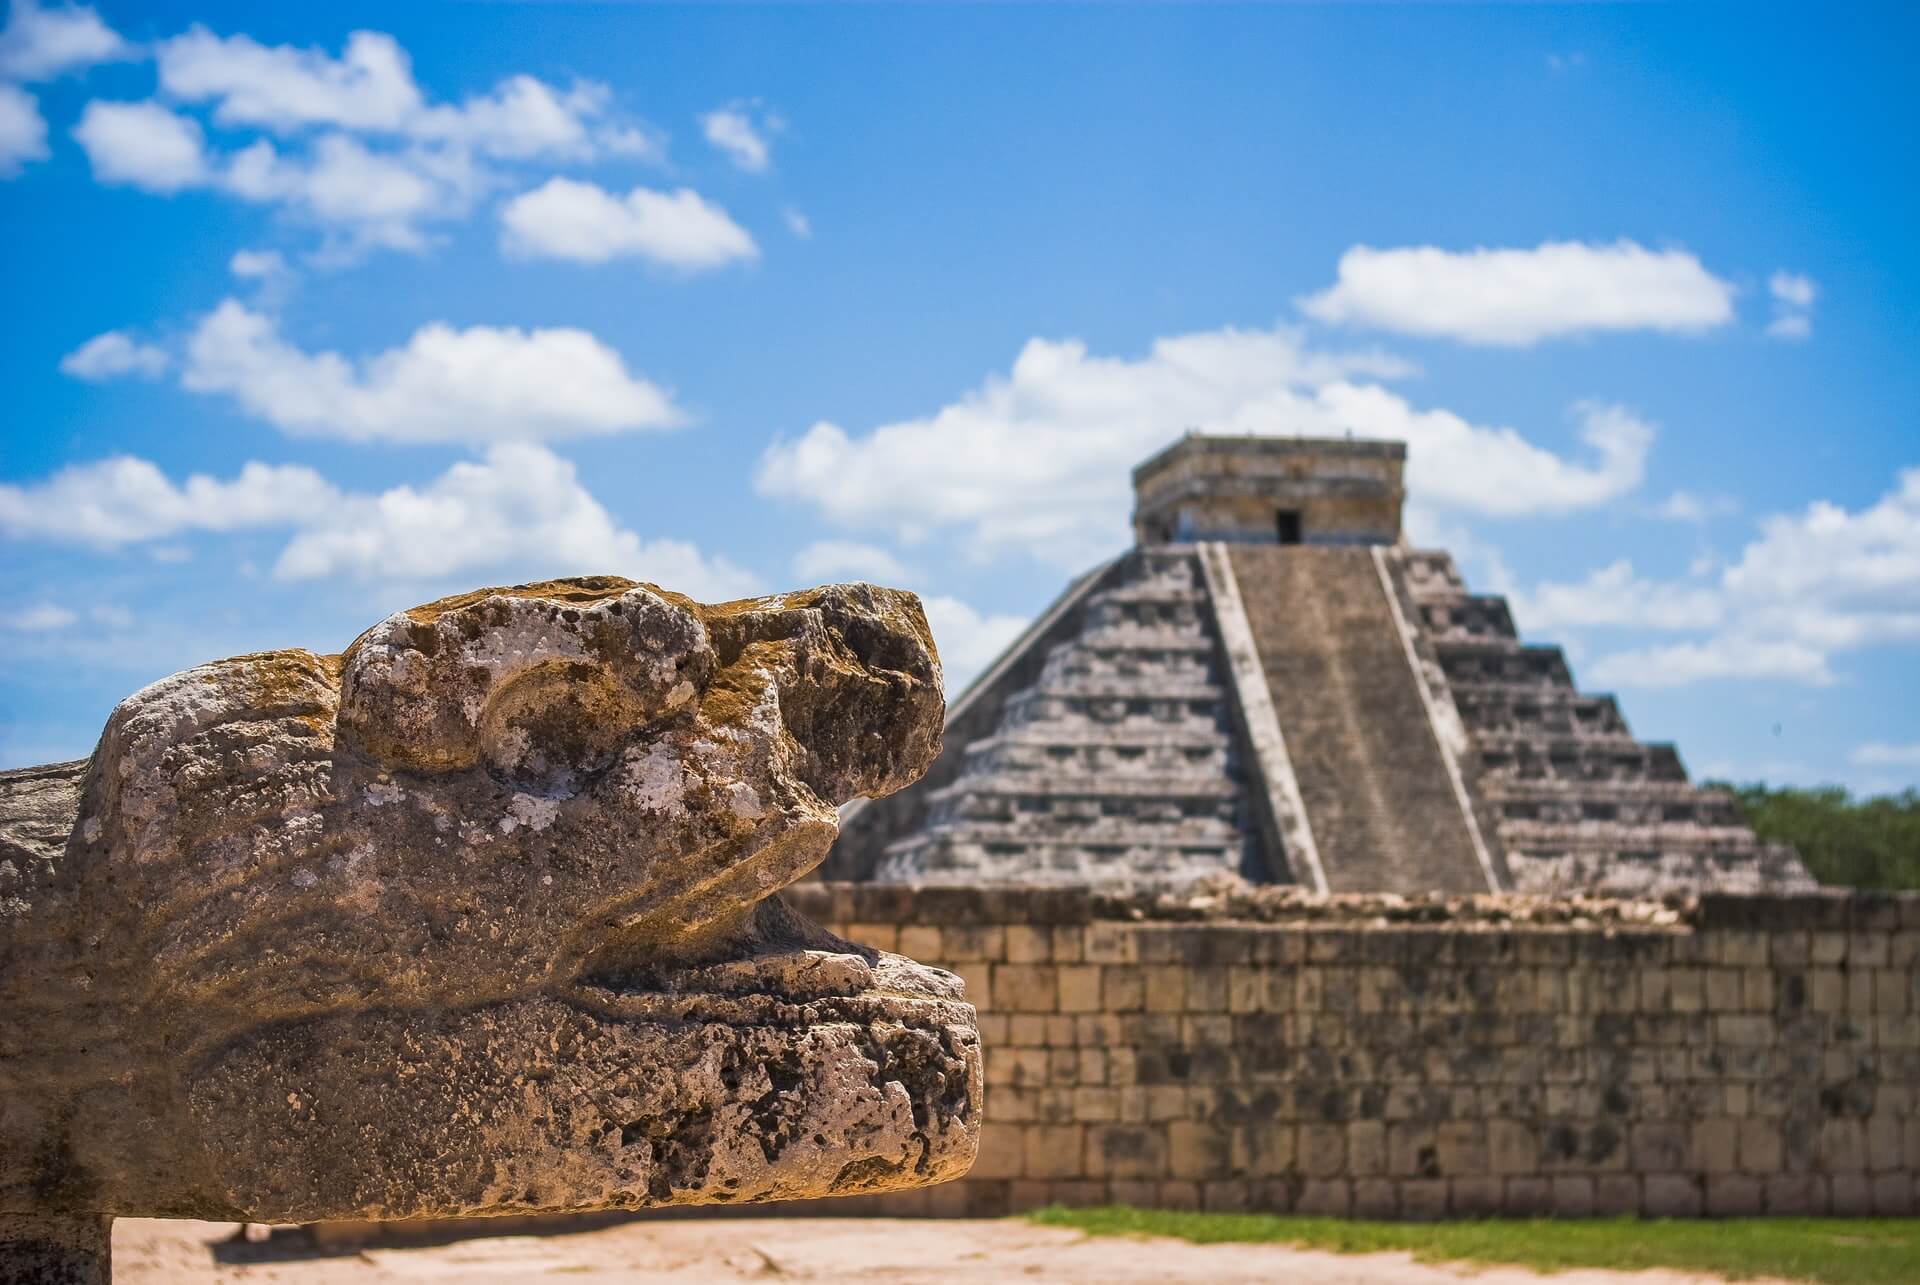 Visiting archaeological sites in Cancun as some of the best ways to relax in Riviera Maya